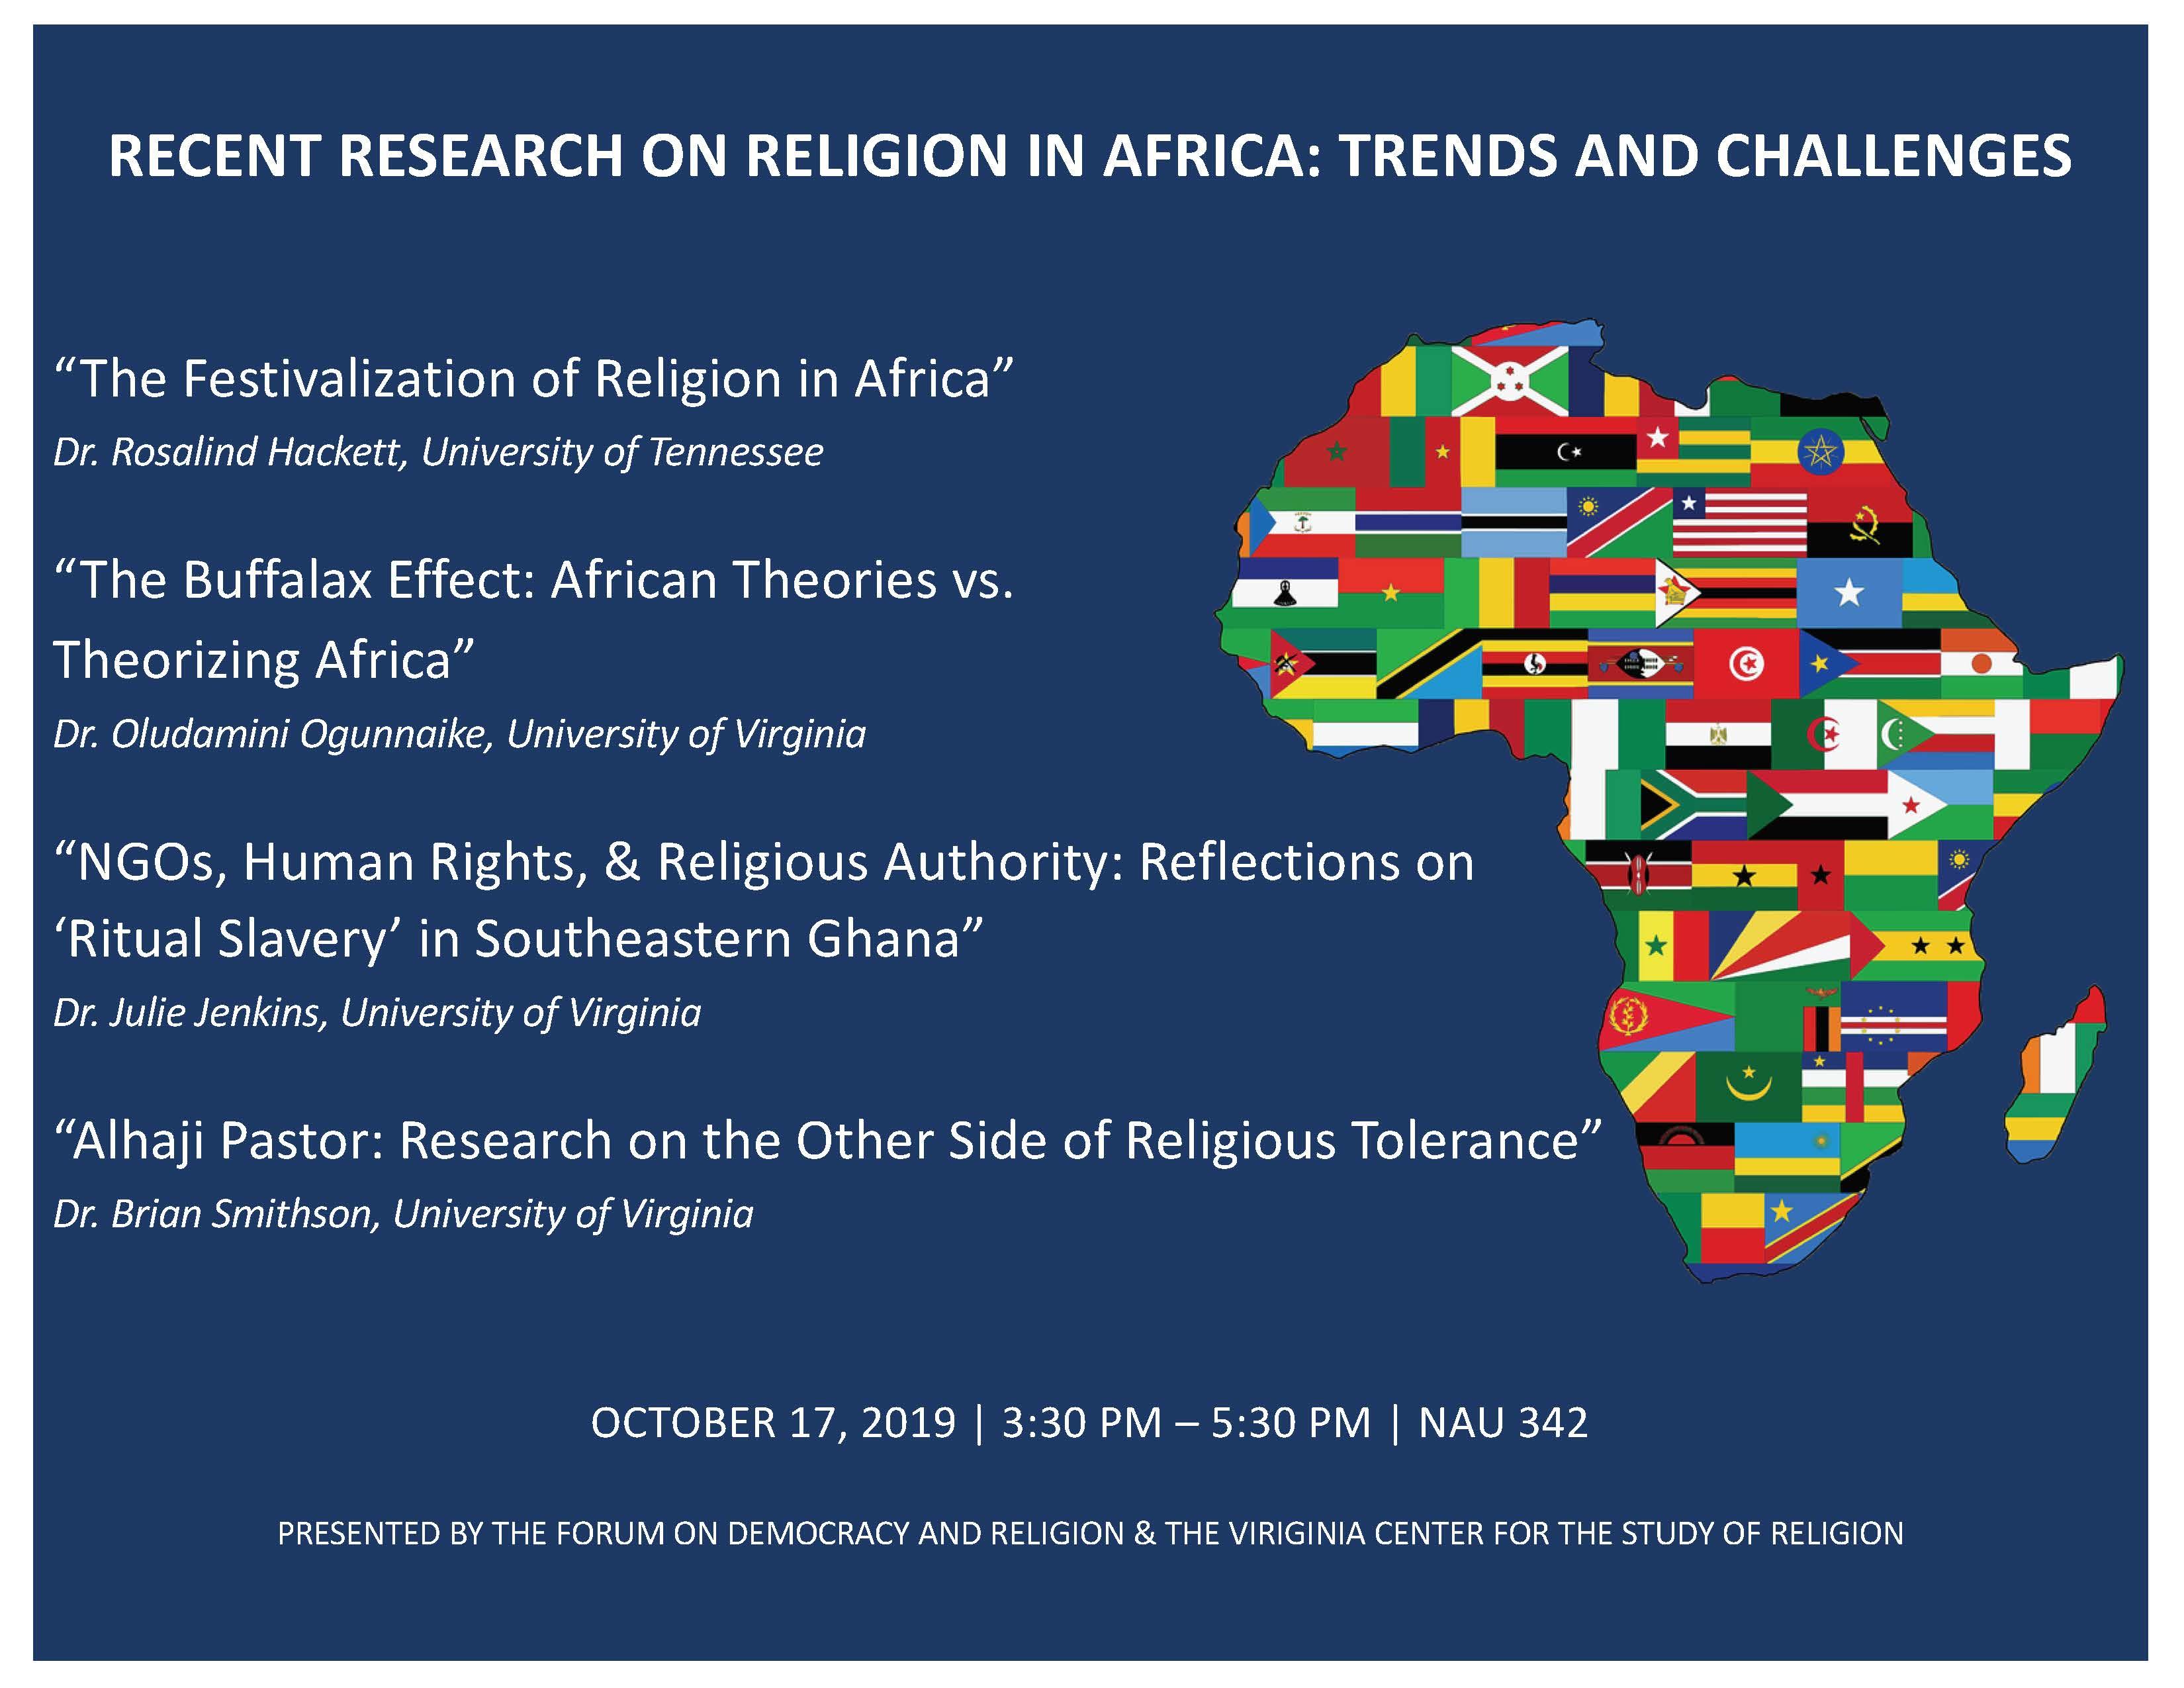 Publicity poster for Recent Research on Religion in Africa event